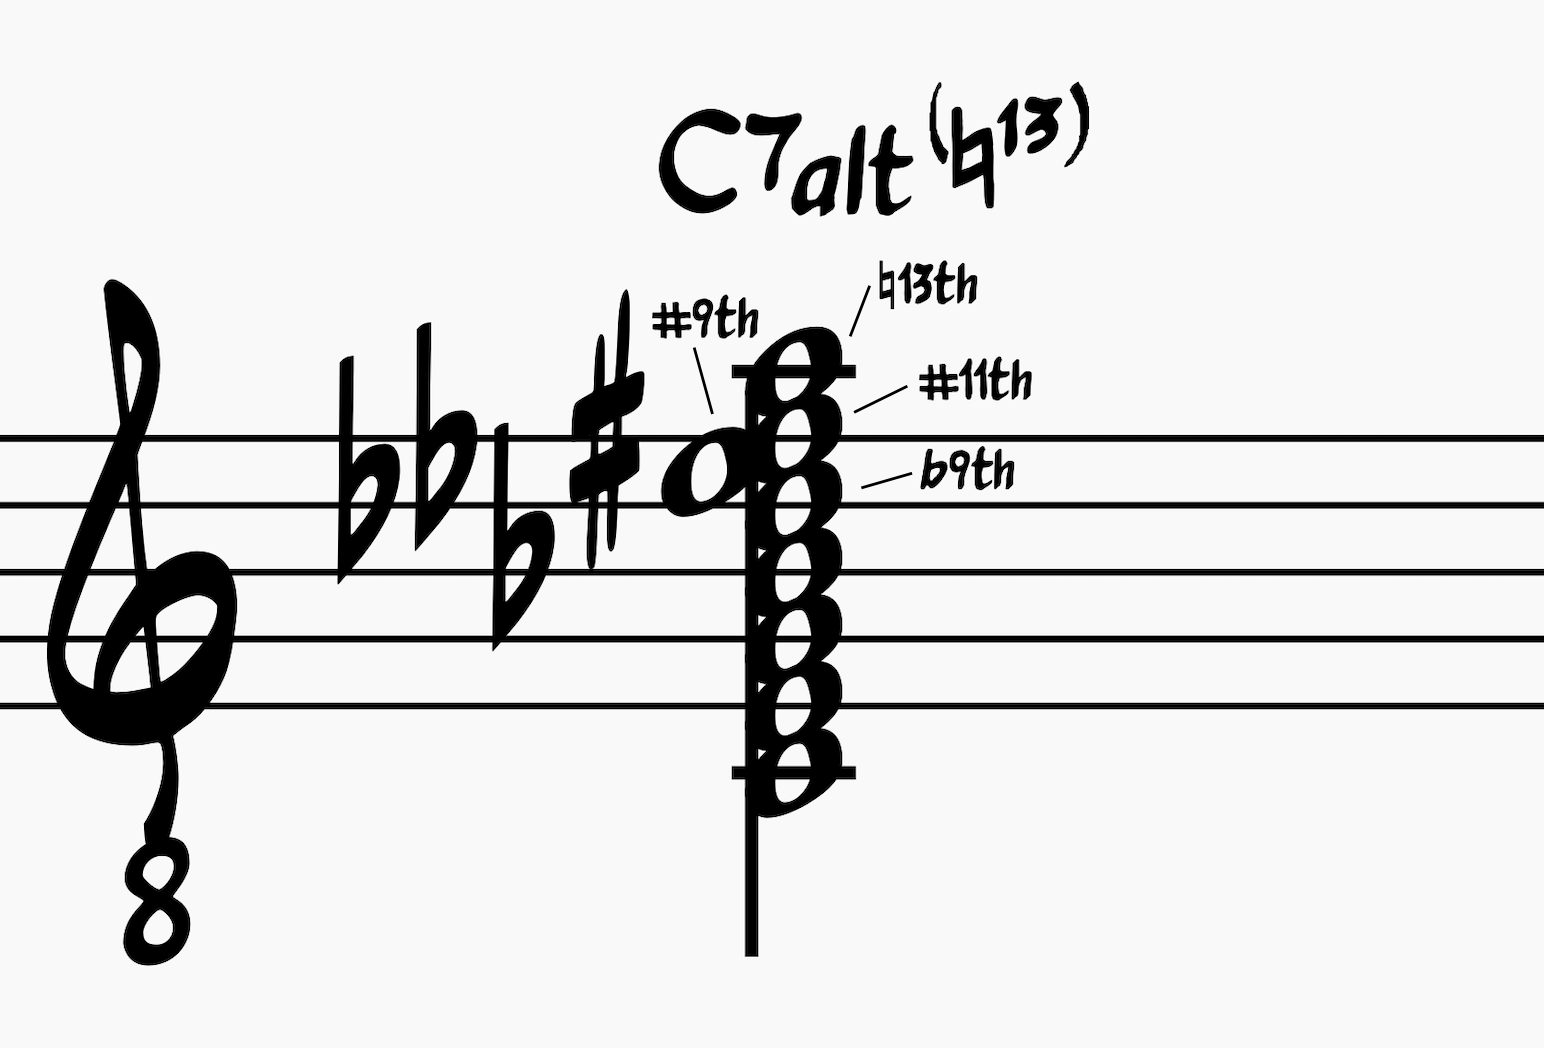 C7alt(♮13) chord symbol showing labeled chord extensions; close root position chord voicing